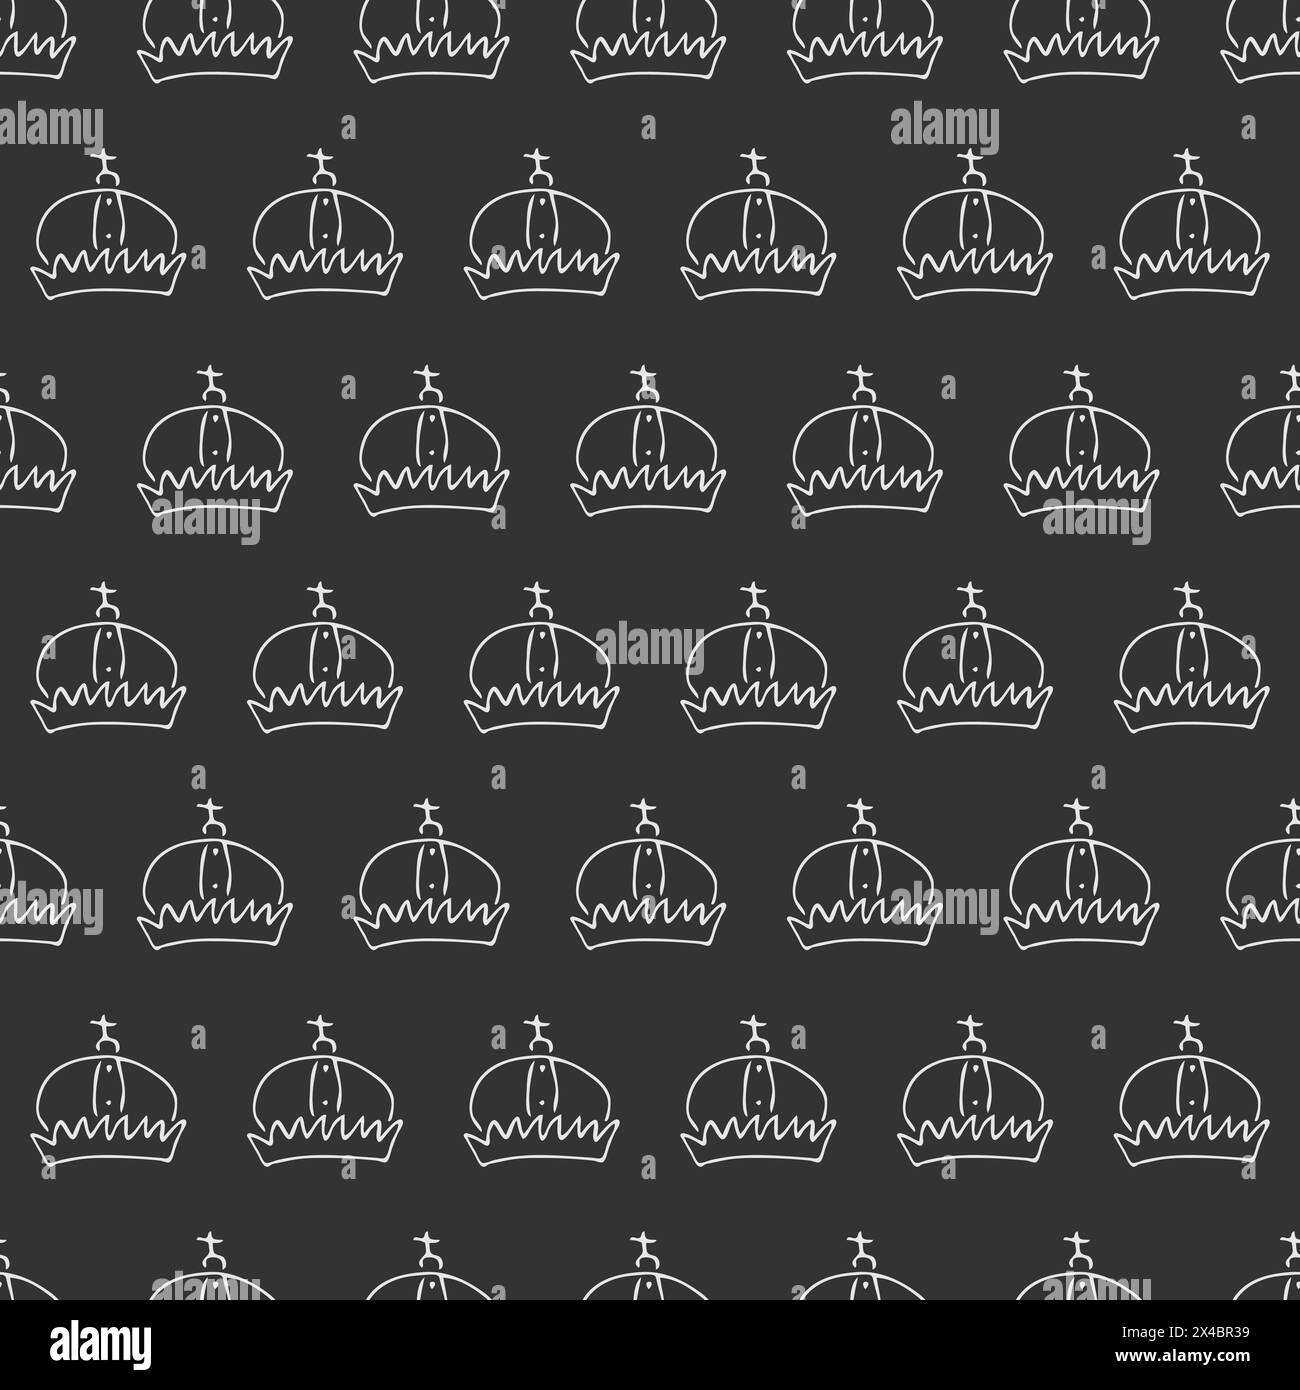 Hand drawn crowns. Seamless pattern of simple graffiti sketch queen or king crowns. Royal imperial coronation and monarch symbols. White brush doodle Stock Vector